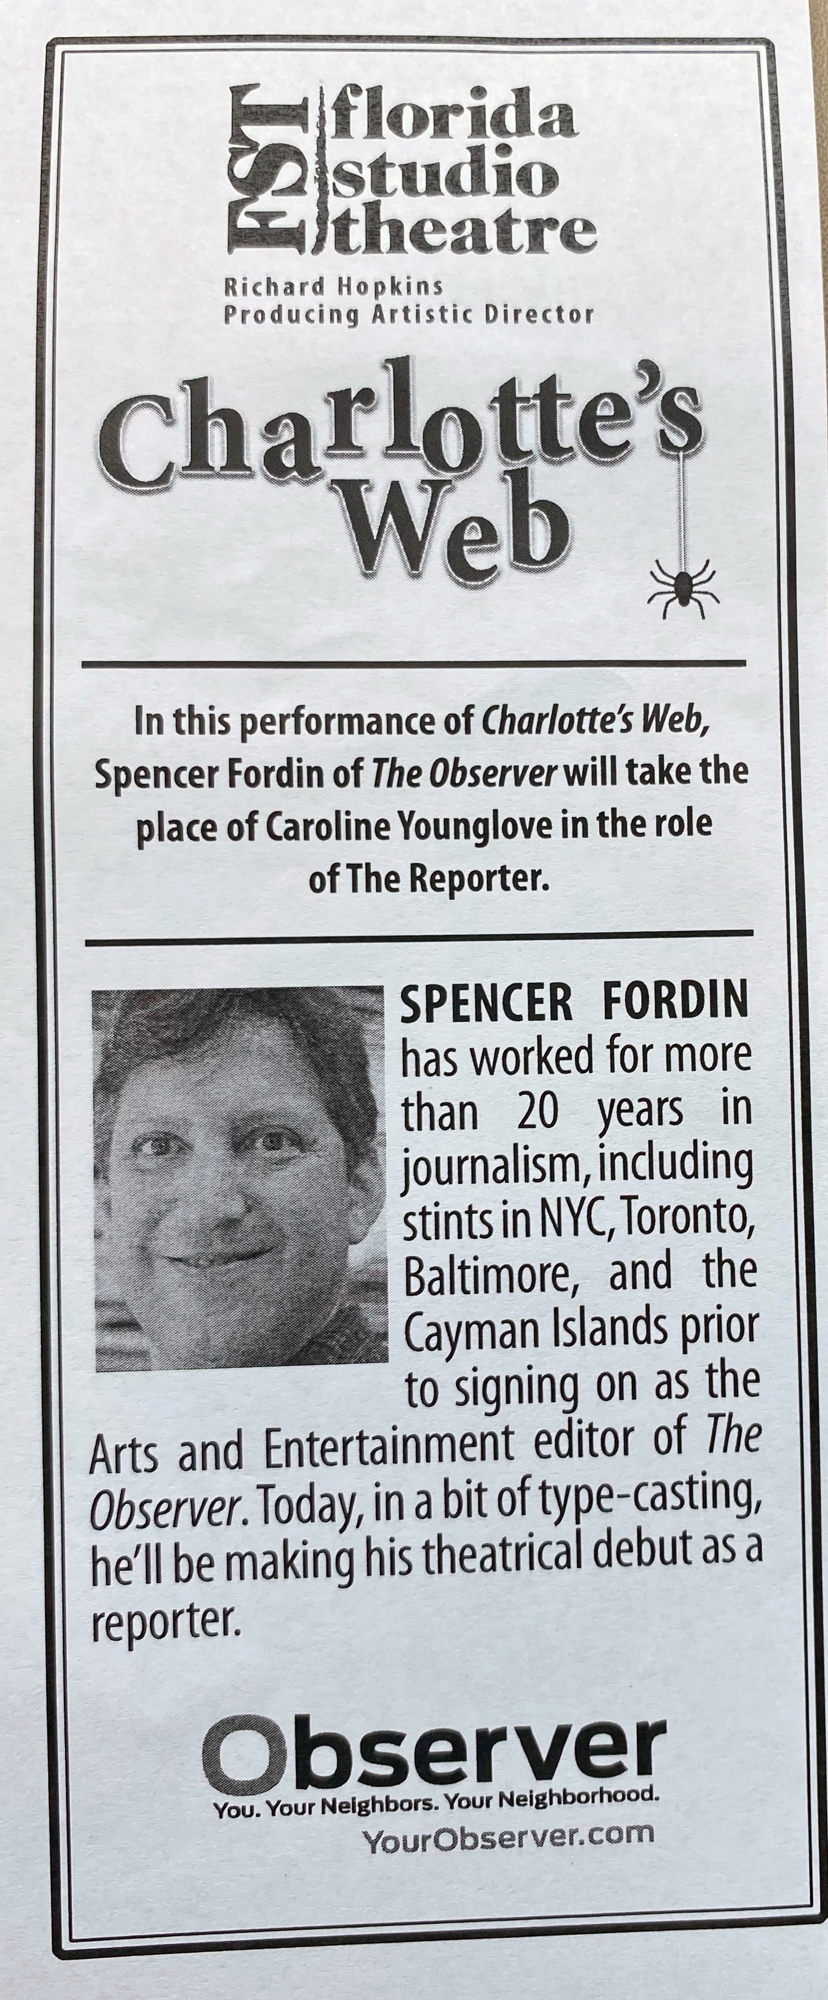 Florida Studio Theatre went to the great lengths of publishing a temporary playbill for the reporter's appearance. (Photo by Spencer Fordin)